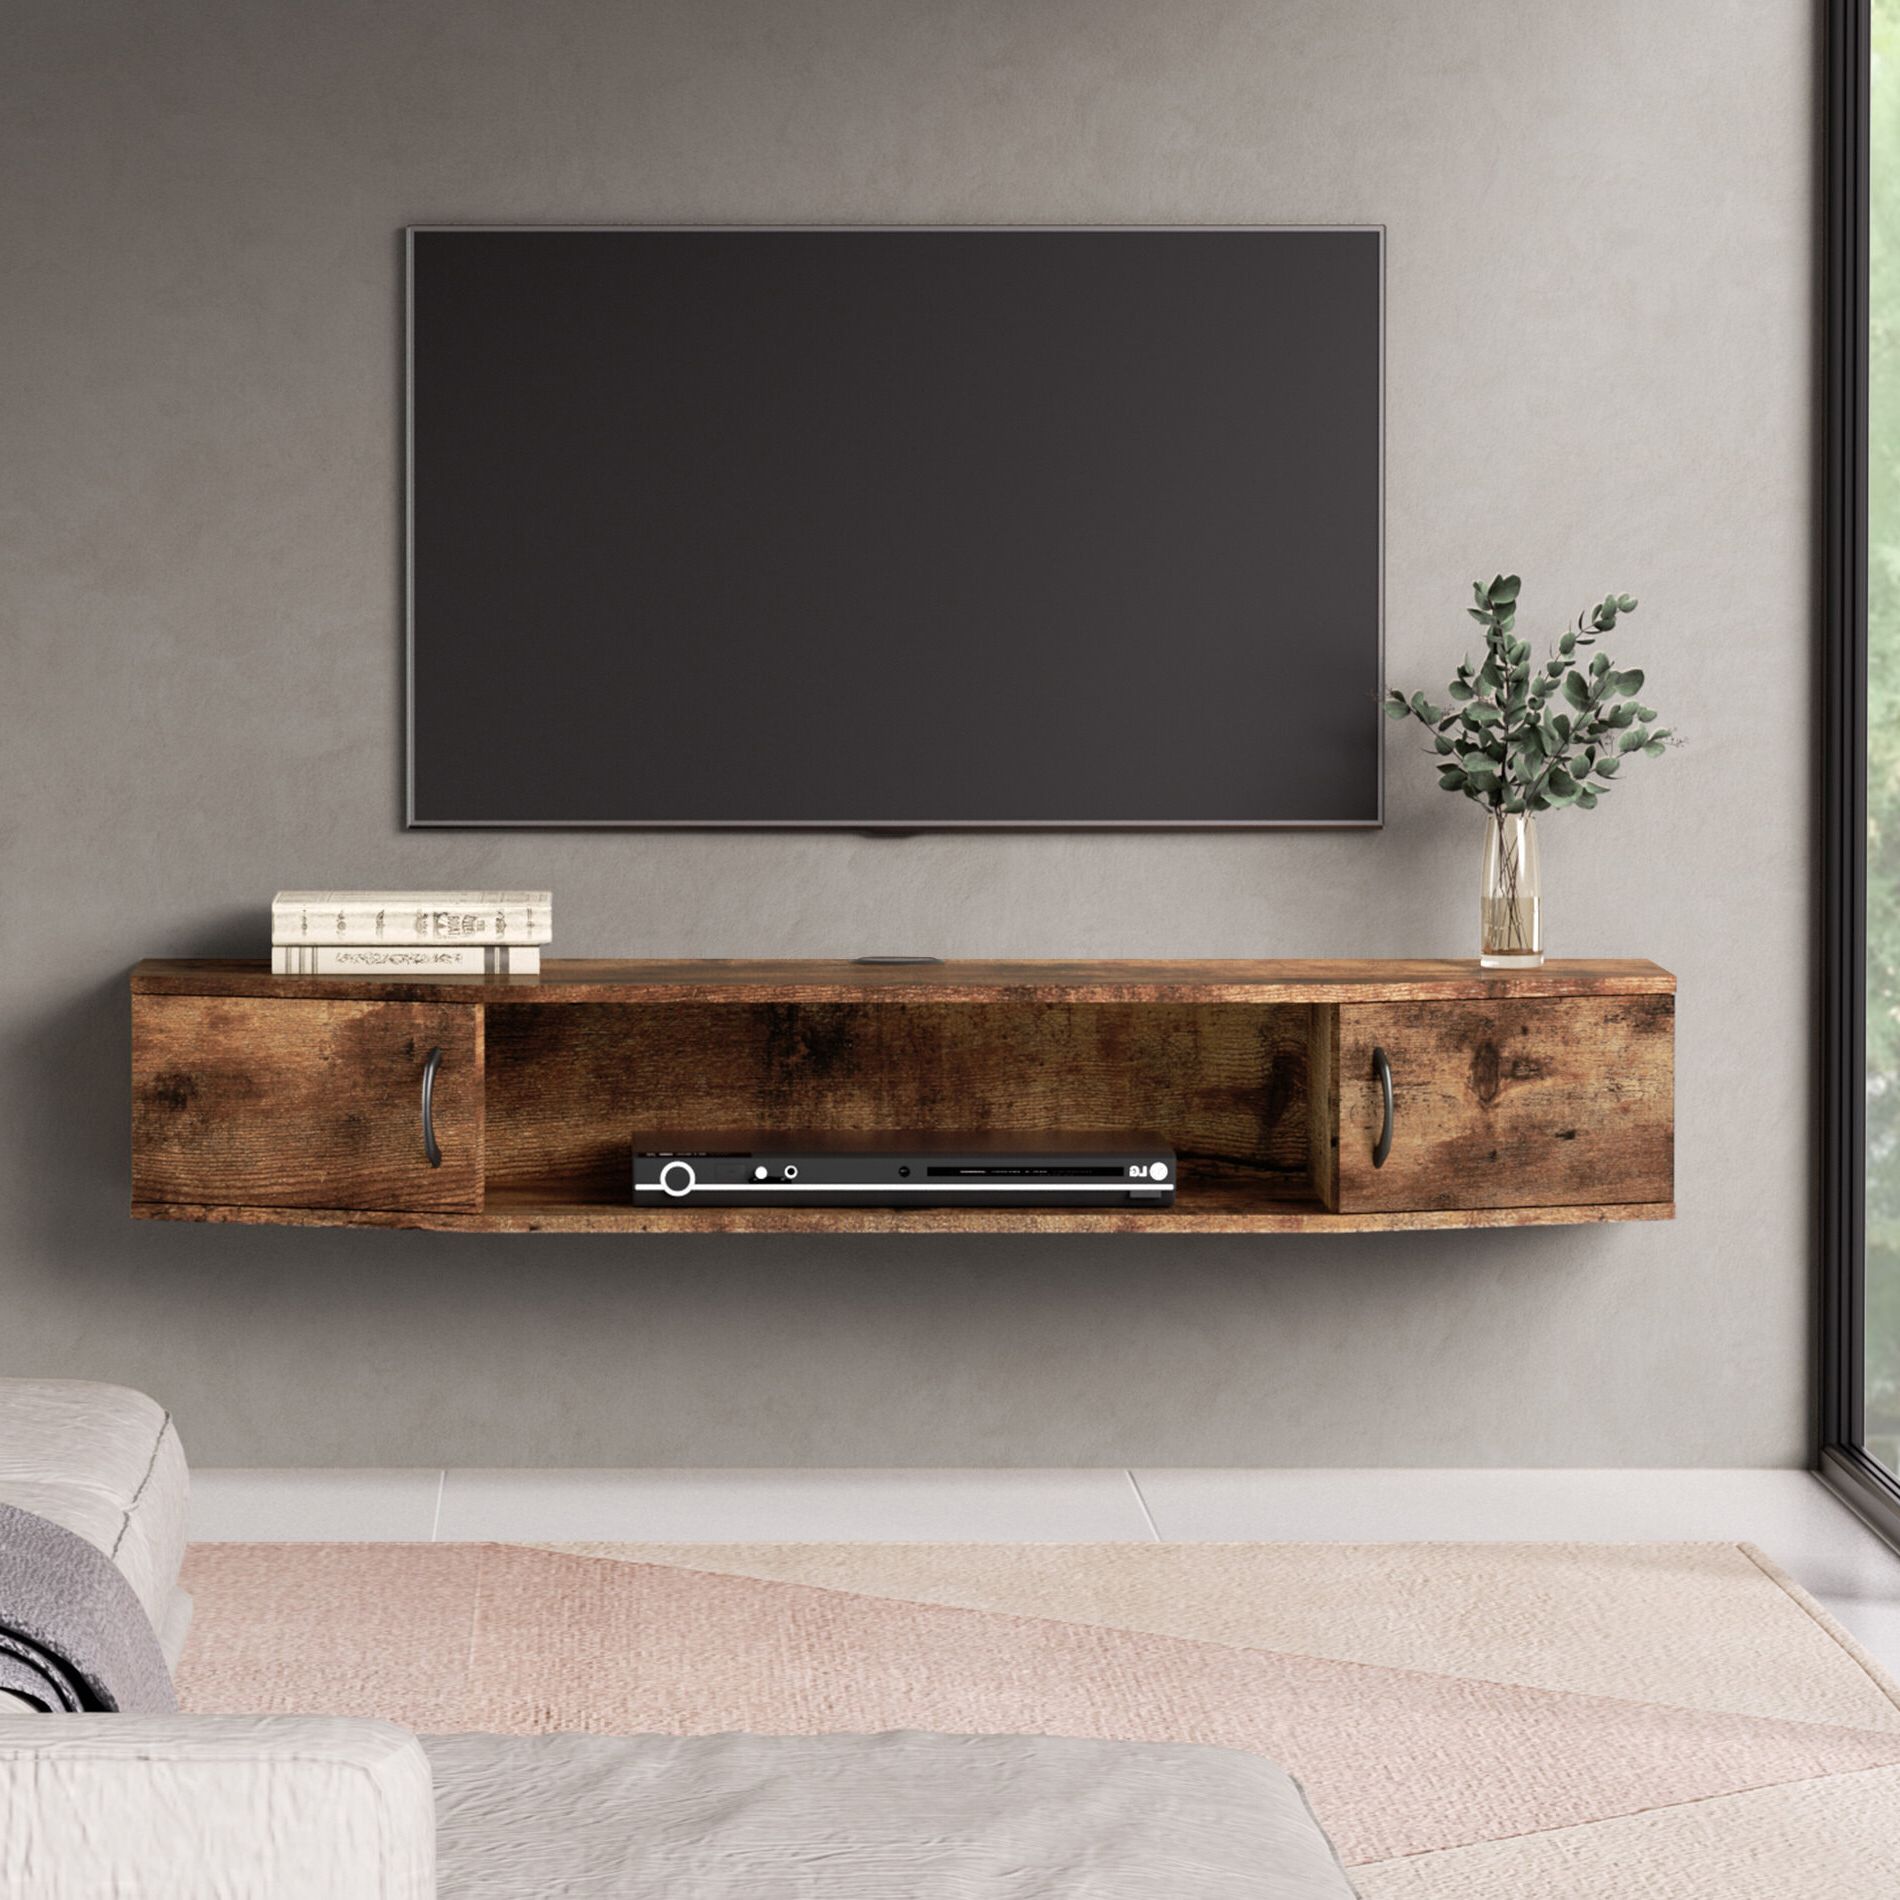 Ebern Designs Rether 43.31'' Media Console & Reviews | Wayfair Intended For Floating Stands For Tvs (Gallery 2 of 20)